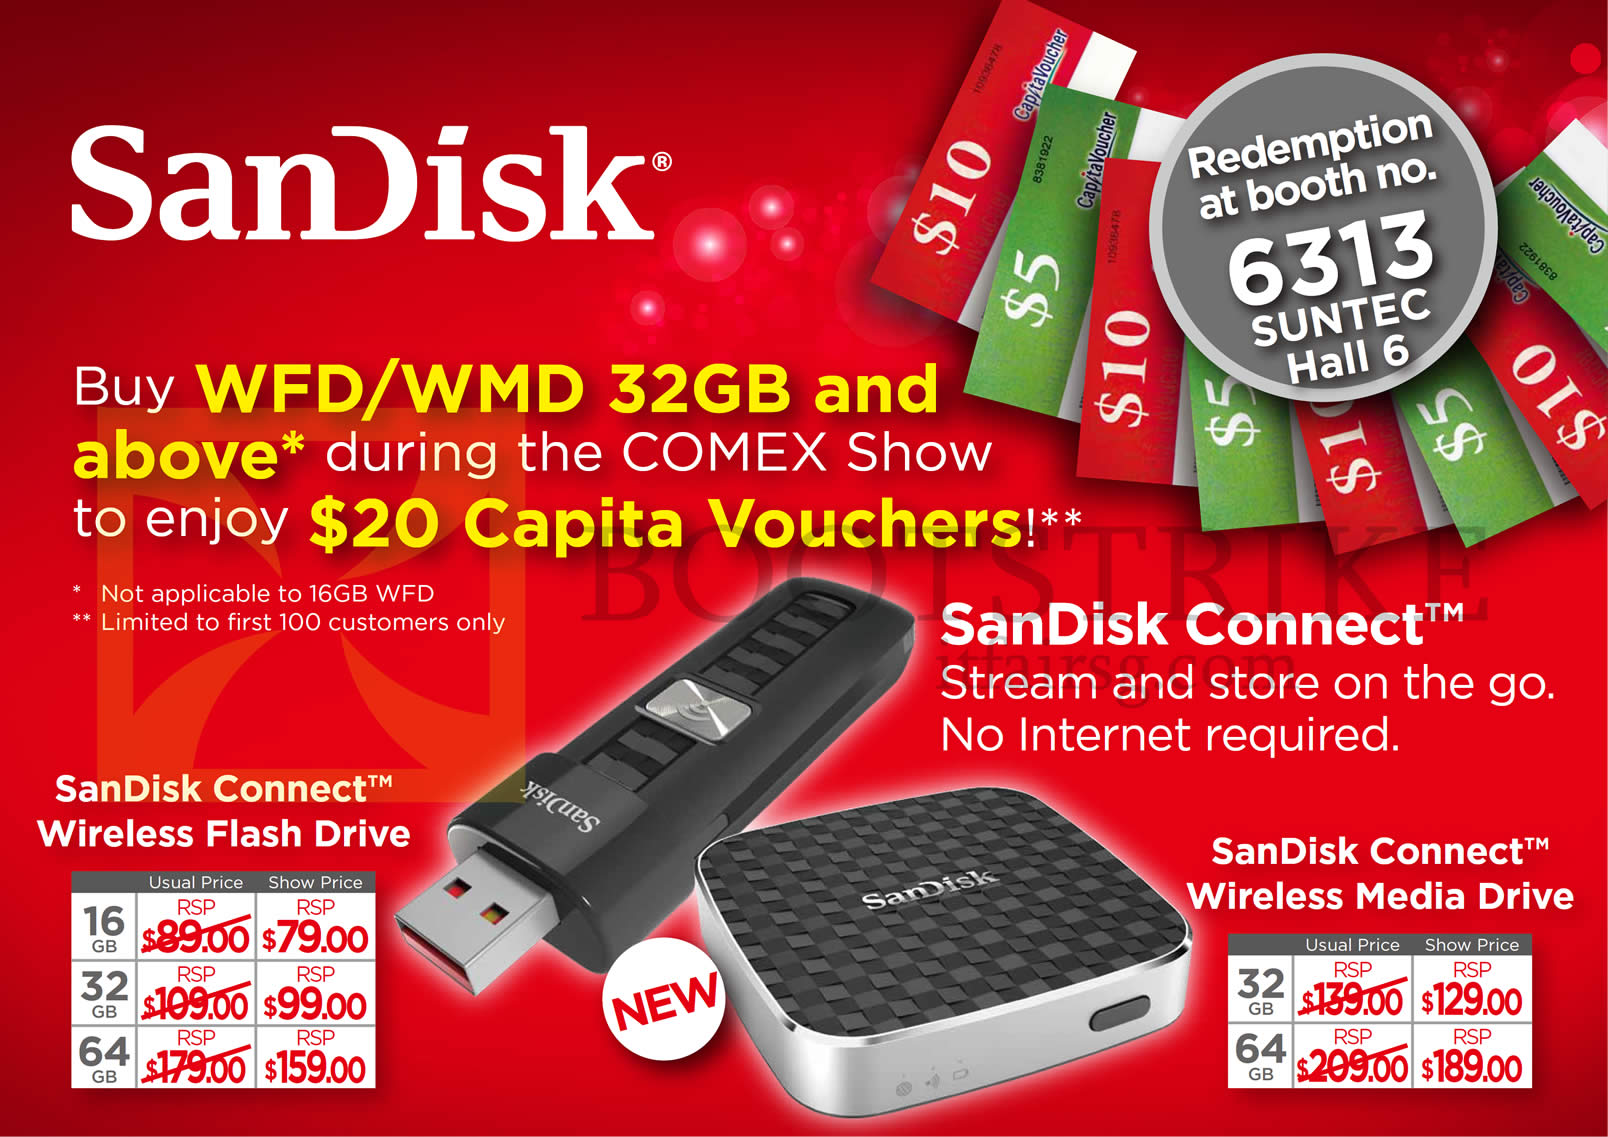 COMEX 2014 price list image brochure of Sandisk Connect Wireless Flash Drive, Wireless Media Drive